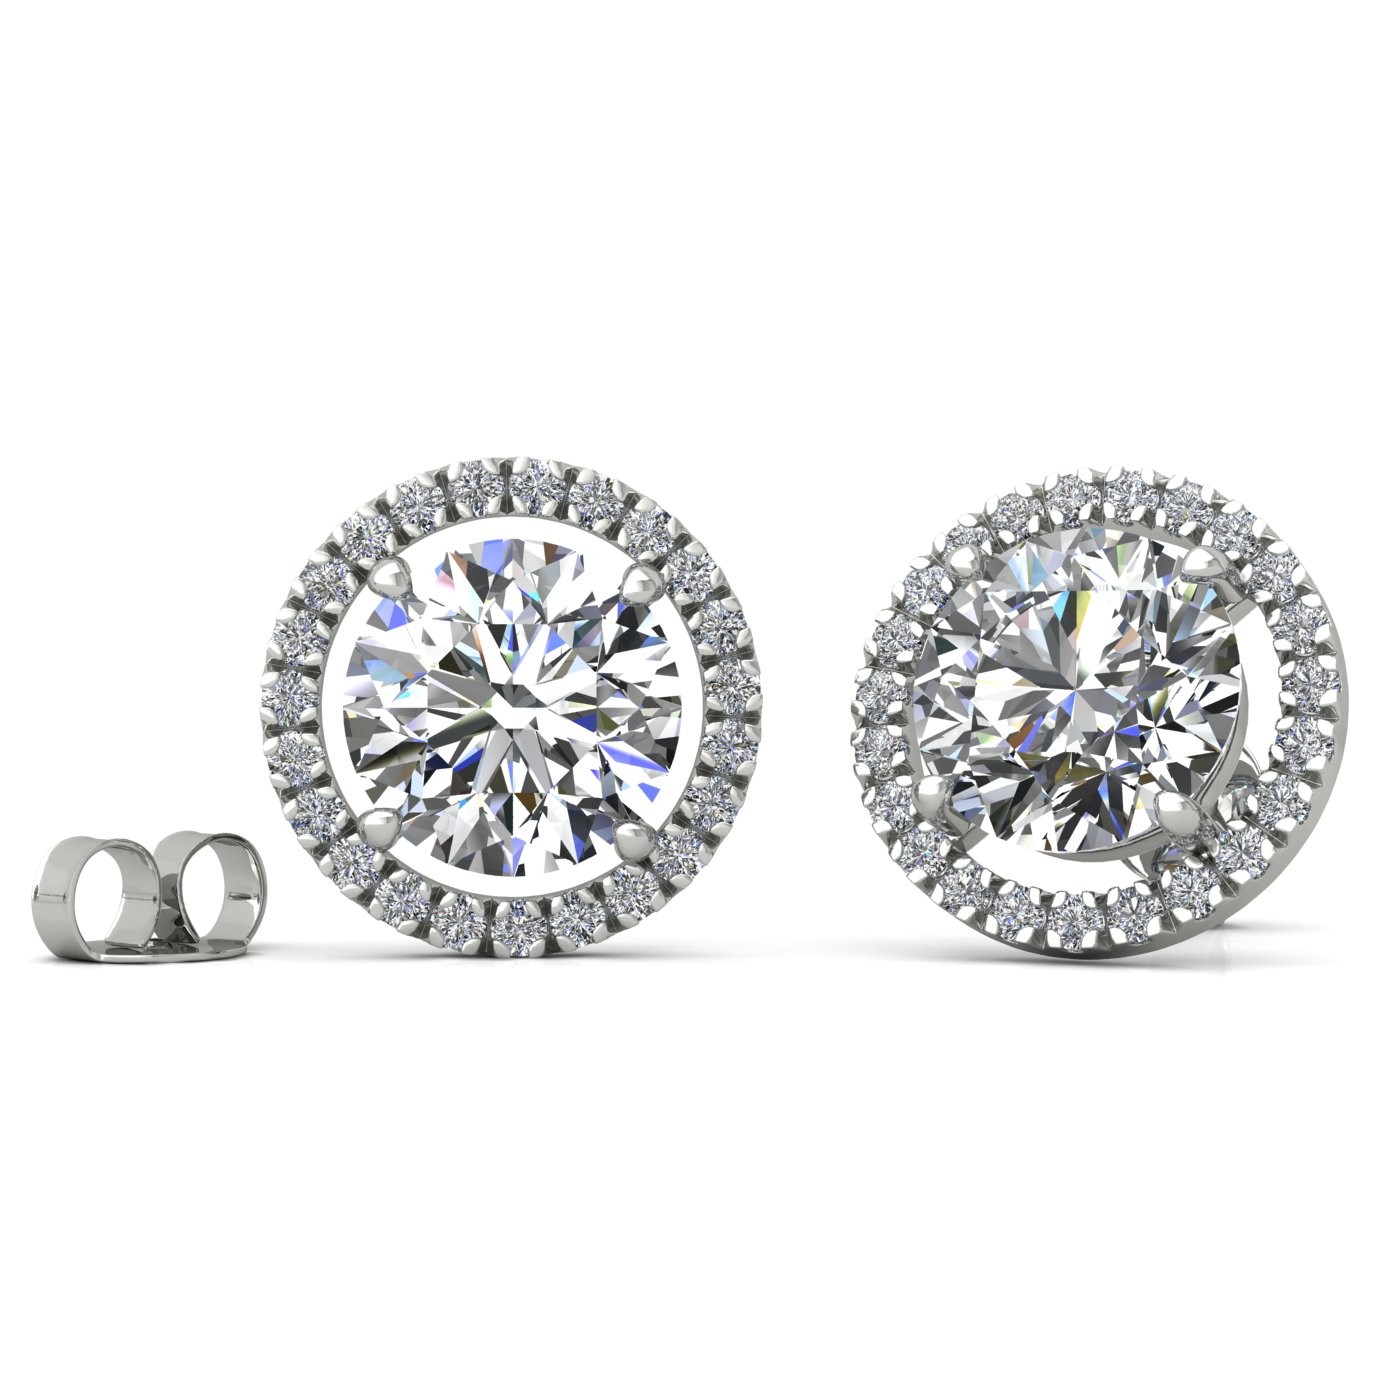 18k white gold 1 ct each (2 tcw) 4 prongs round brilliant cut halo diamond earring studs Photos & images